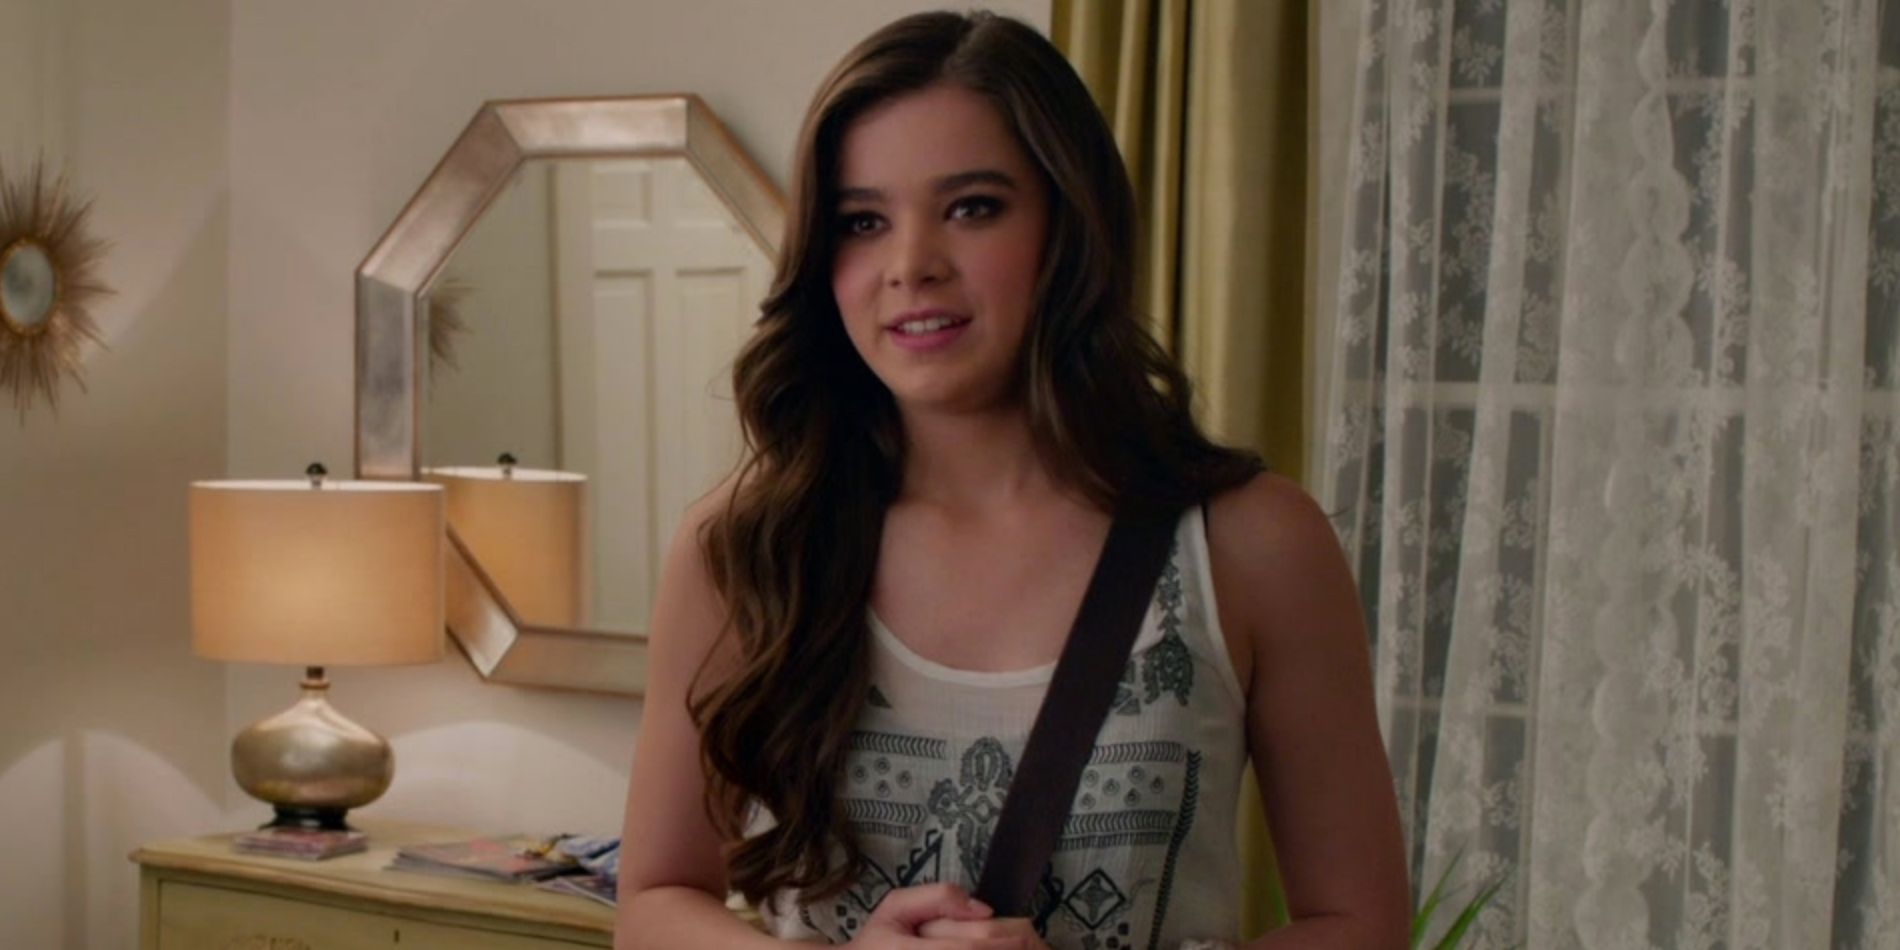 Pitch Perfect Which Barden Bella Are You Based On Your Zodiac Sign